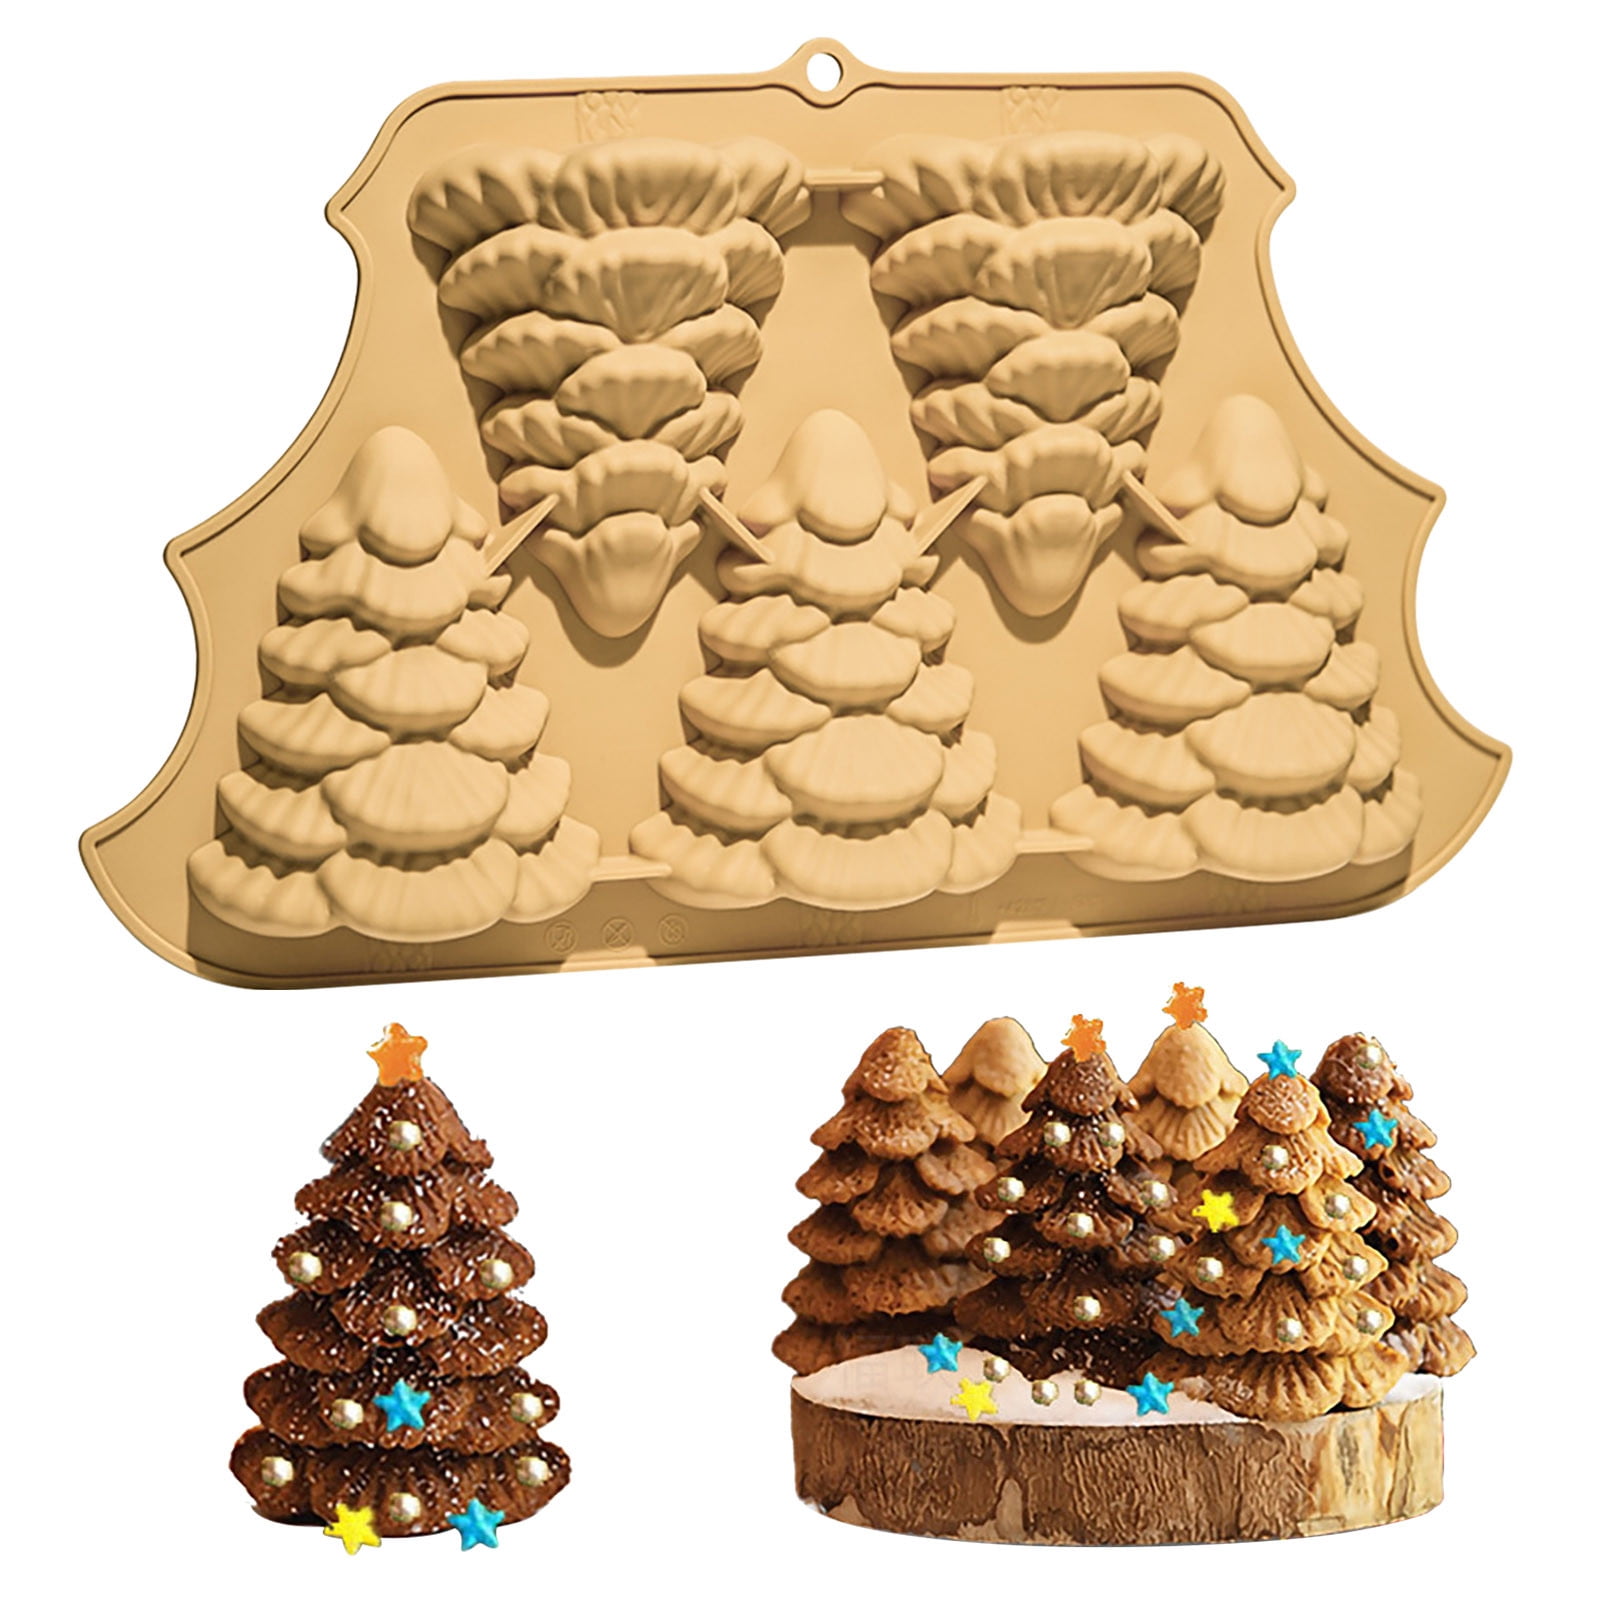  Operitacx Christmas Tree Cake Mold Christmas DIY Silicone Mold  for Cake Cute Cupcake Mold Non-Stick Baking Mold Cake Candy Mold for Xmas Holiday  Baking Supplies (8.2x10.6inch): Home & Kitchen